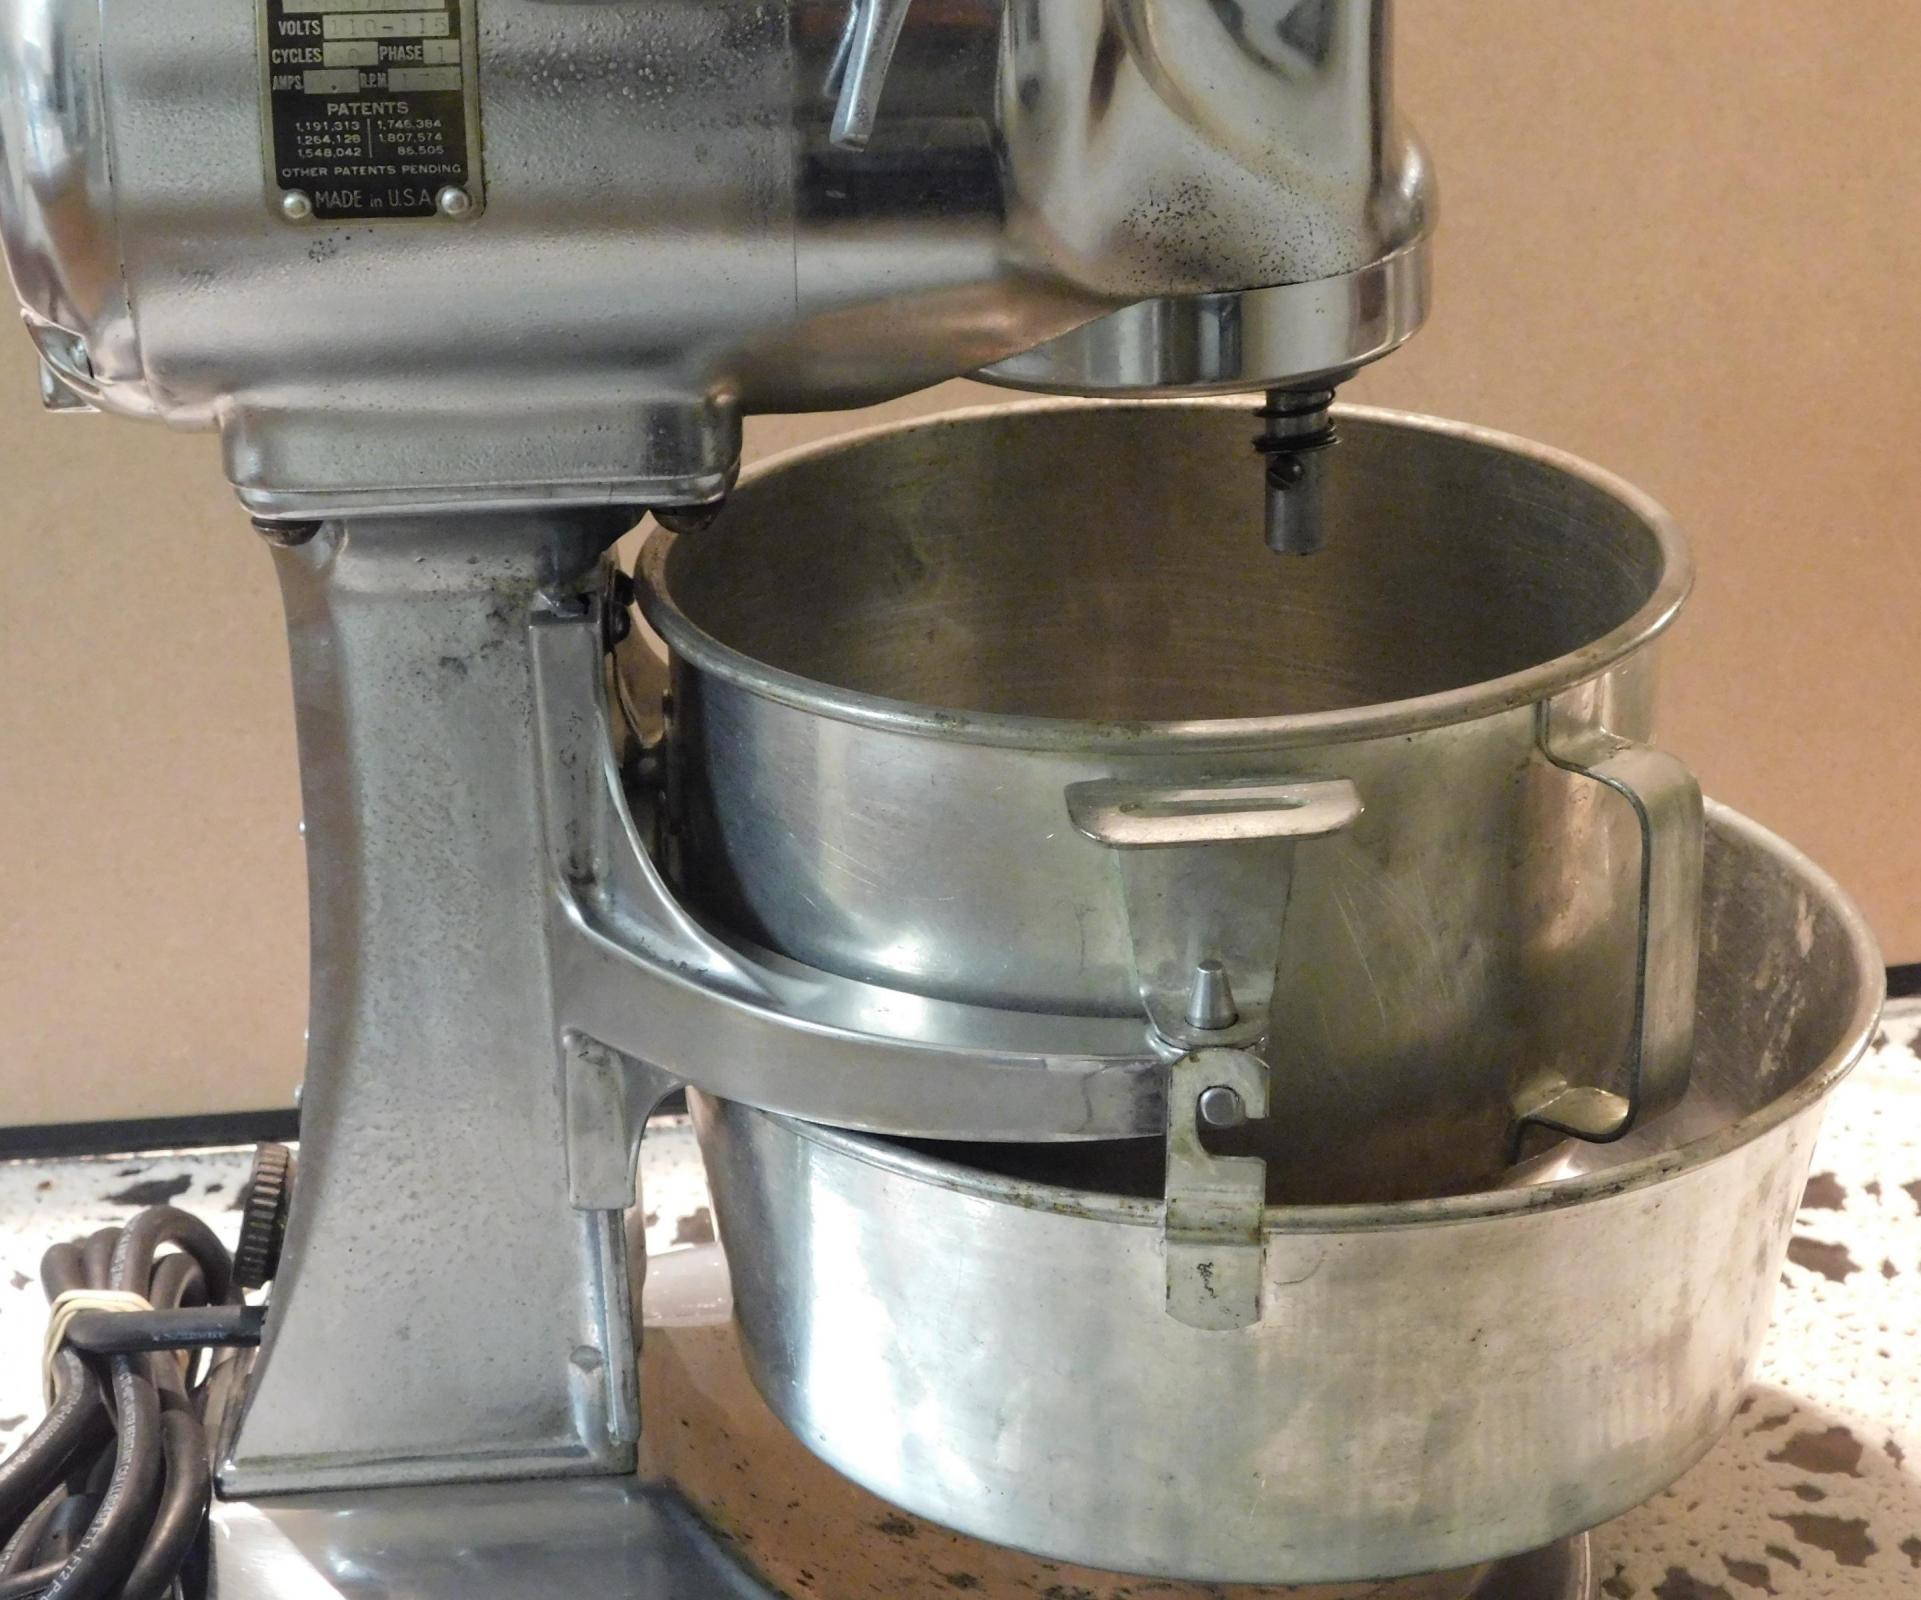 Servicing an 80+ year old KitchenAid Model G! With some sprinkles